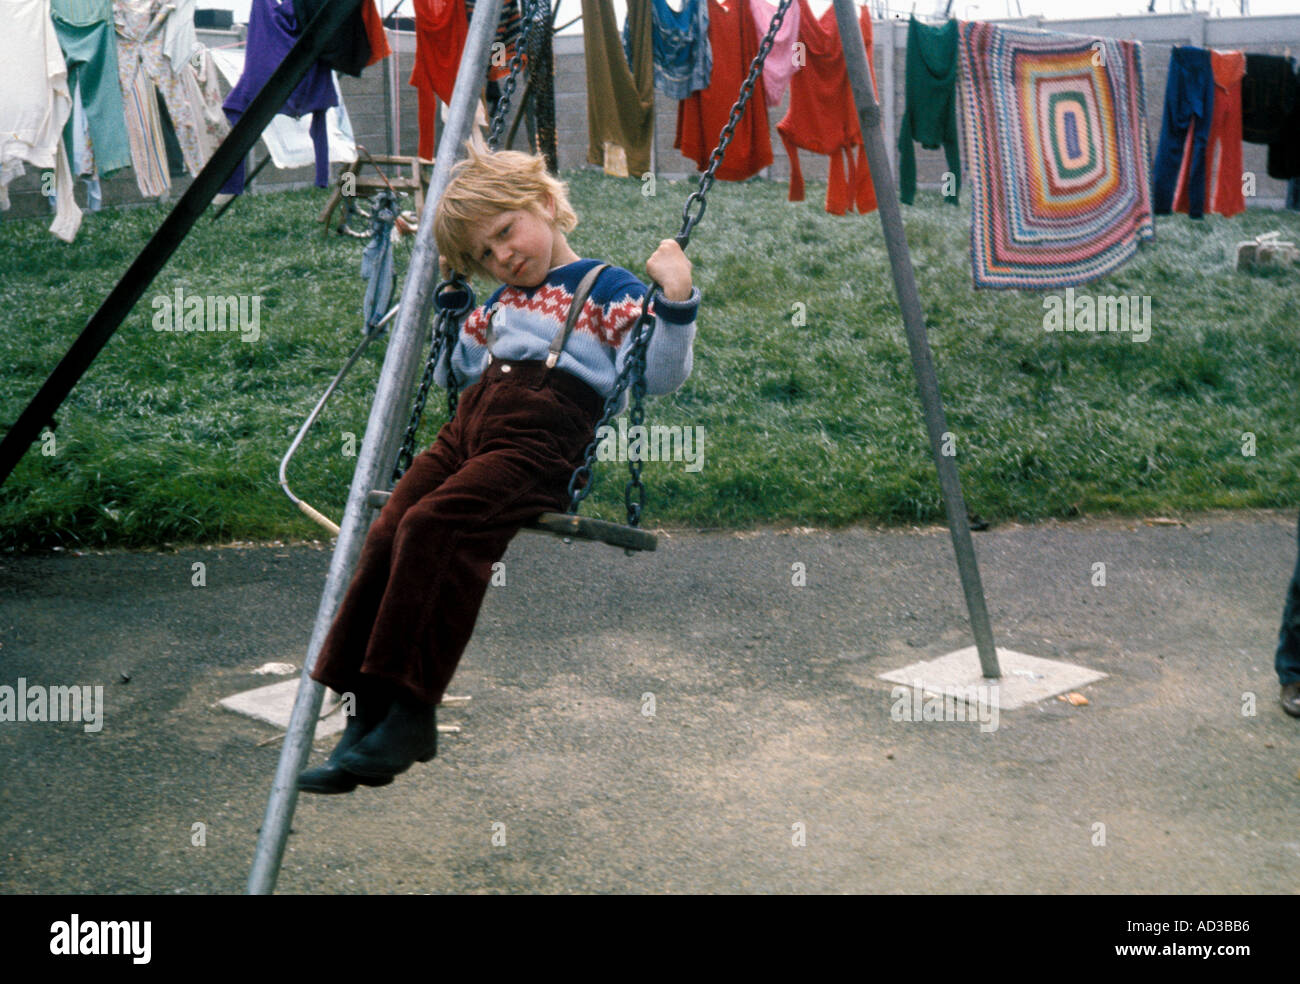 Gypsy children playing in camp site. Stock Photo